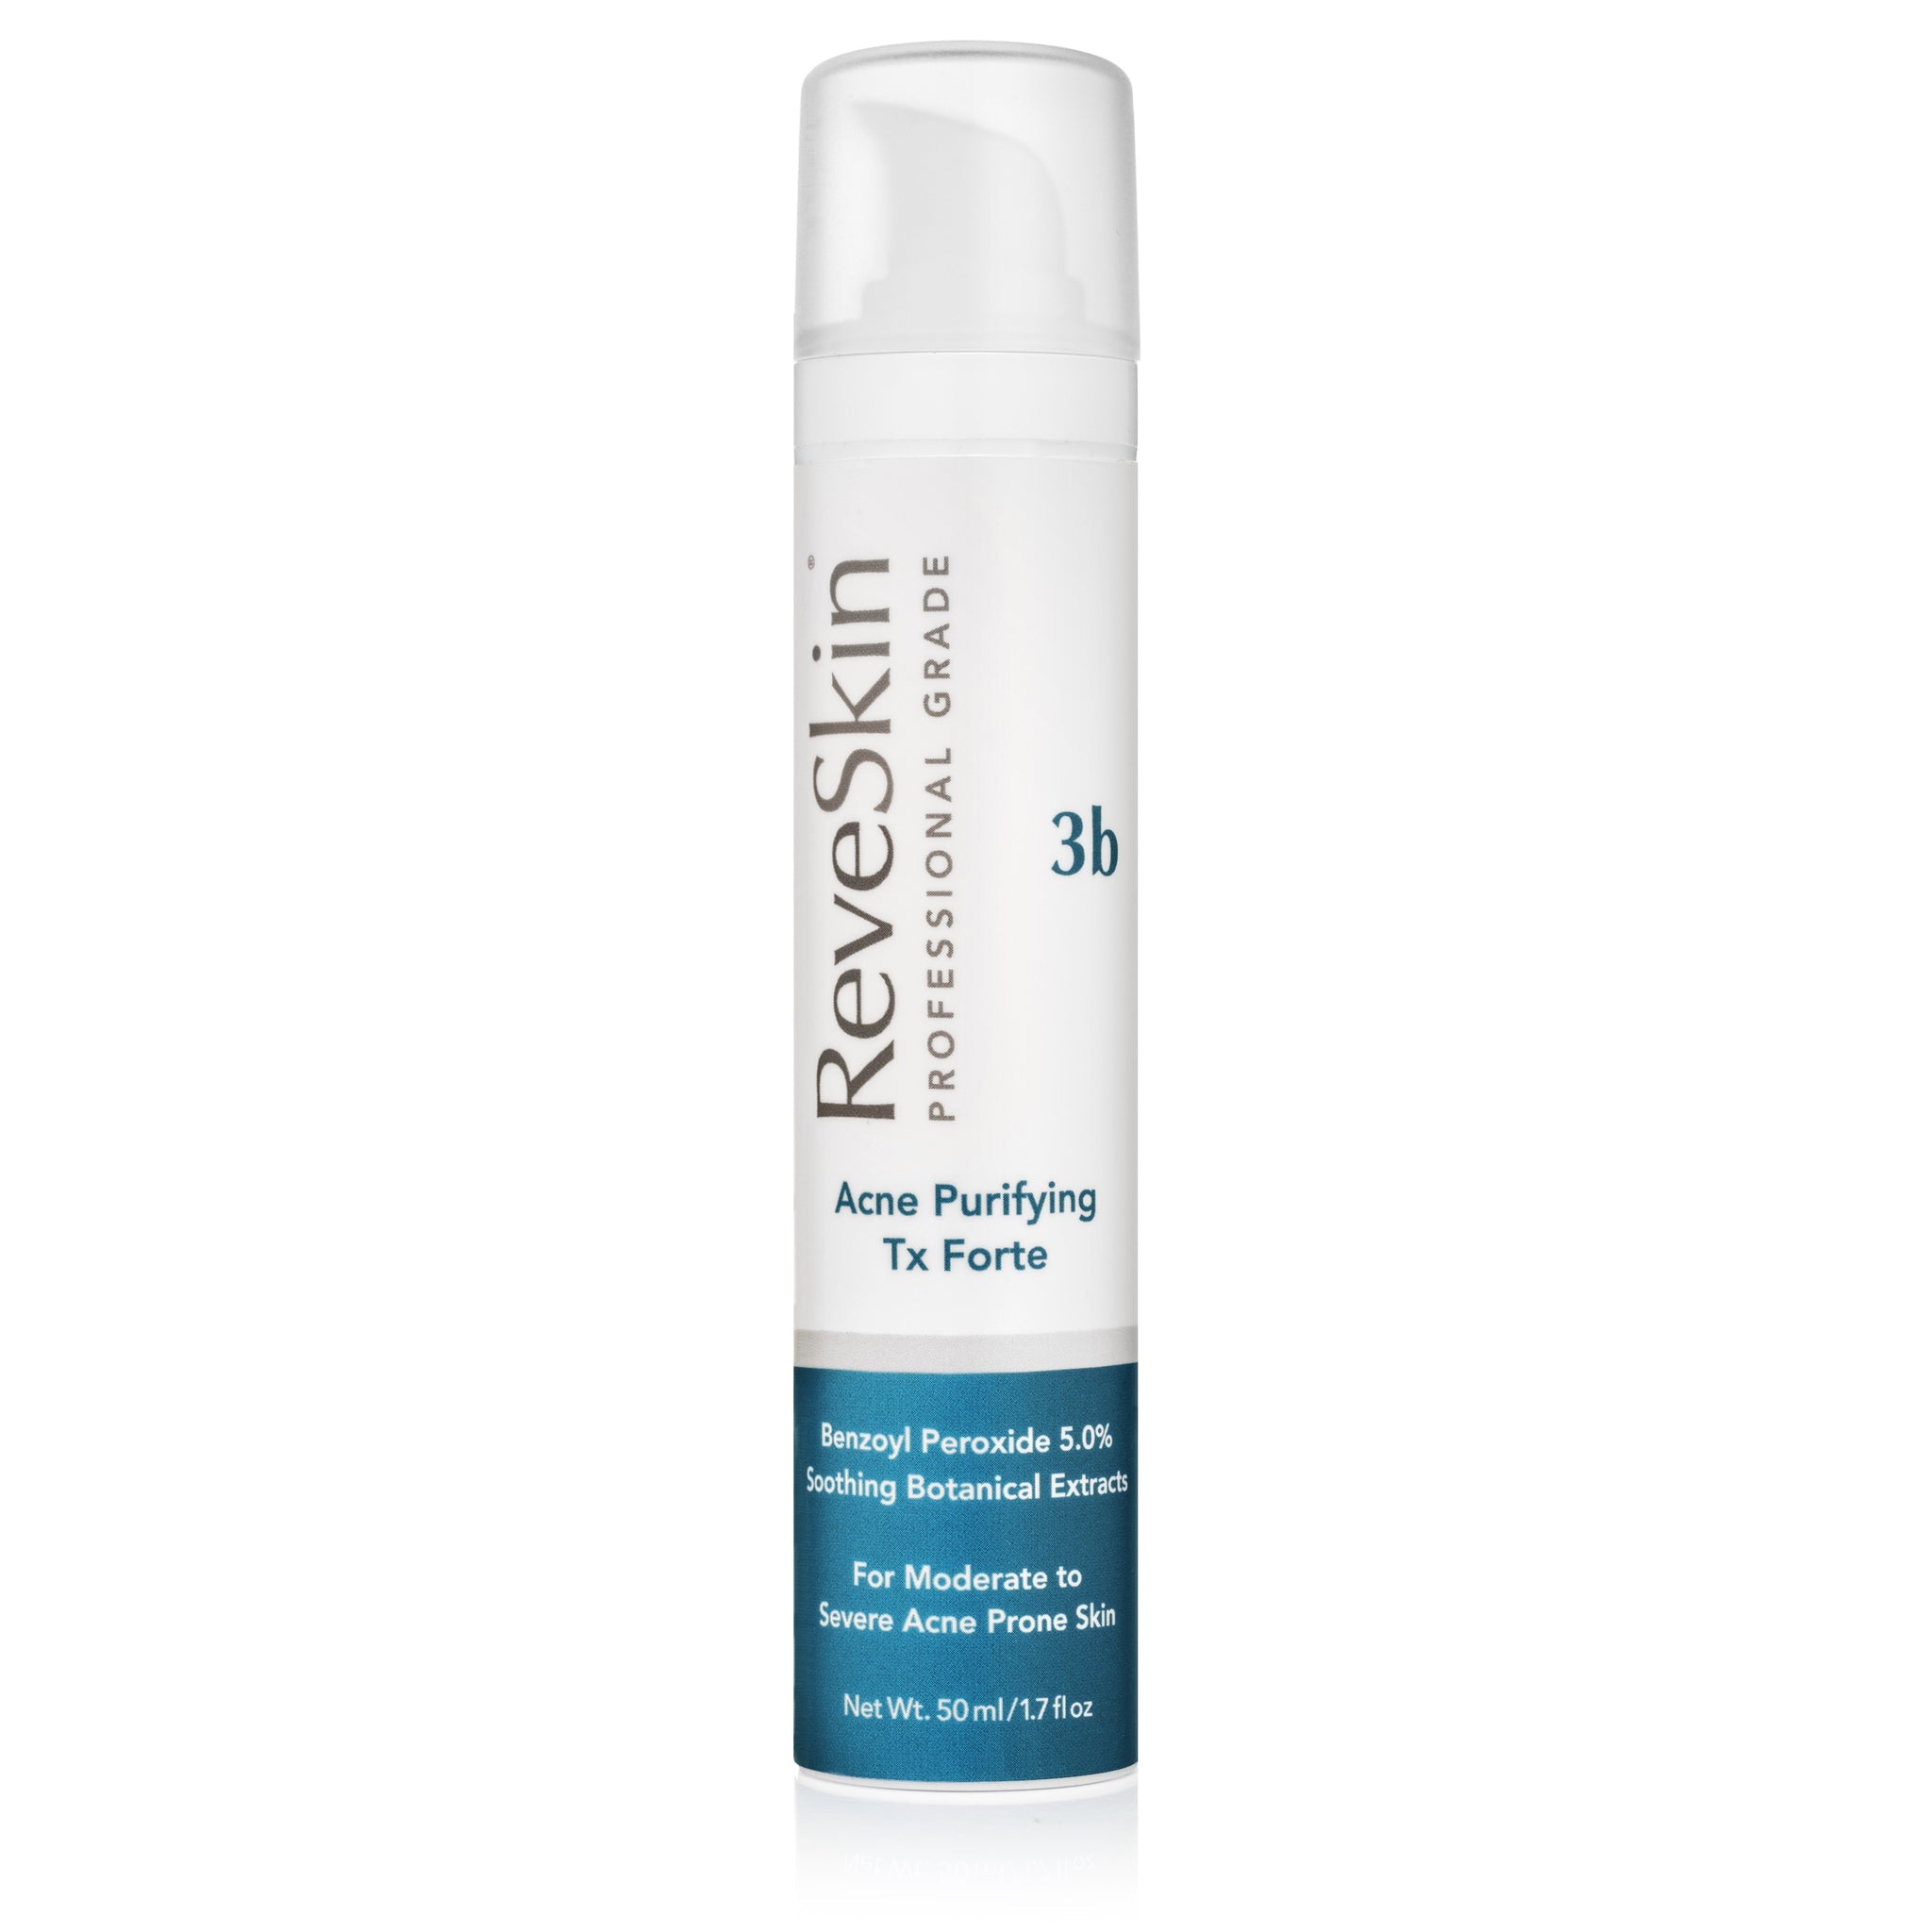 Acne Purifying Tx Forte